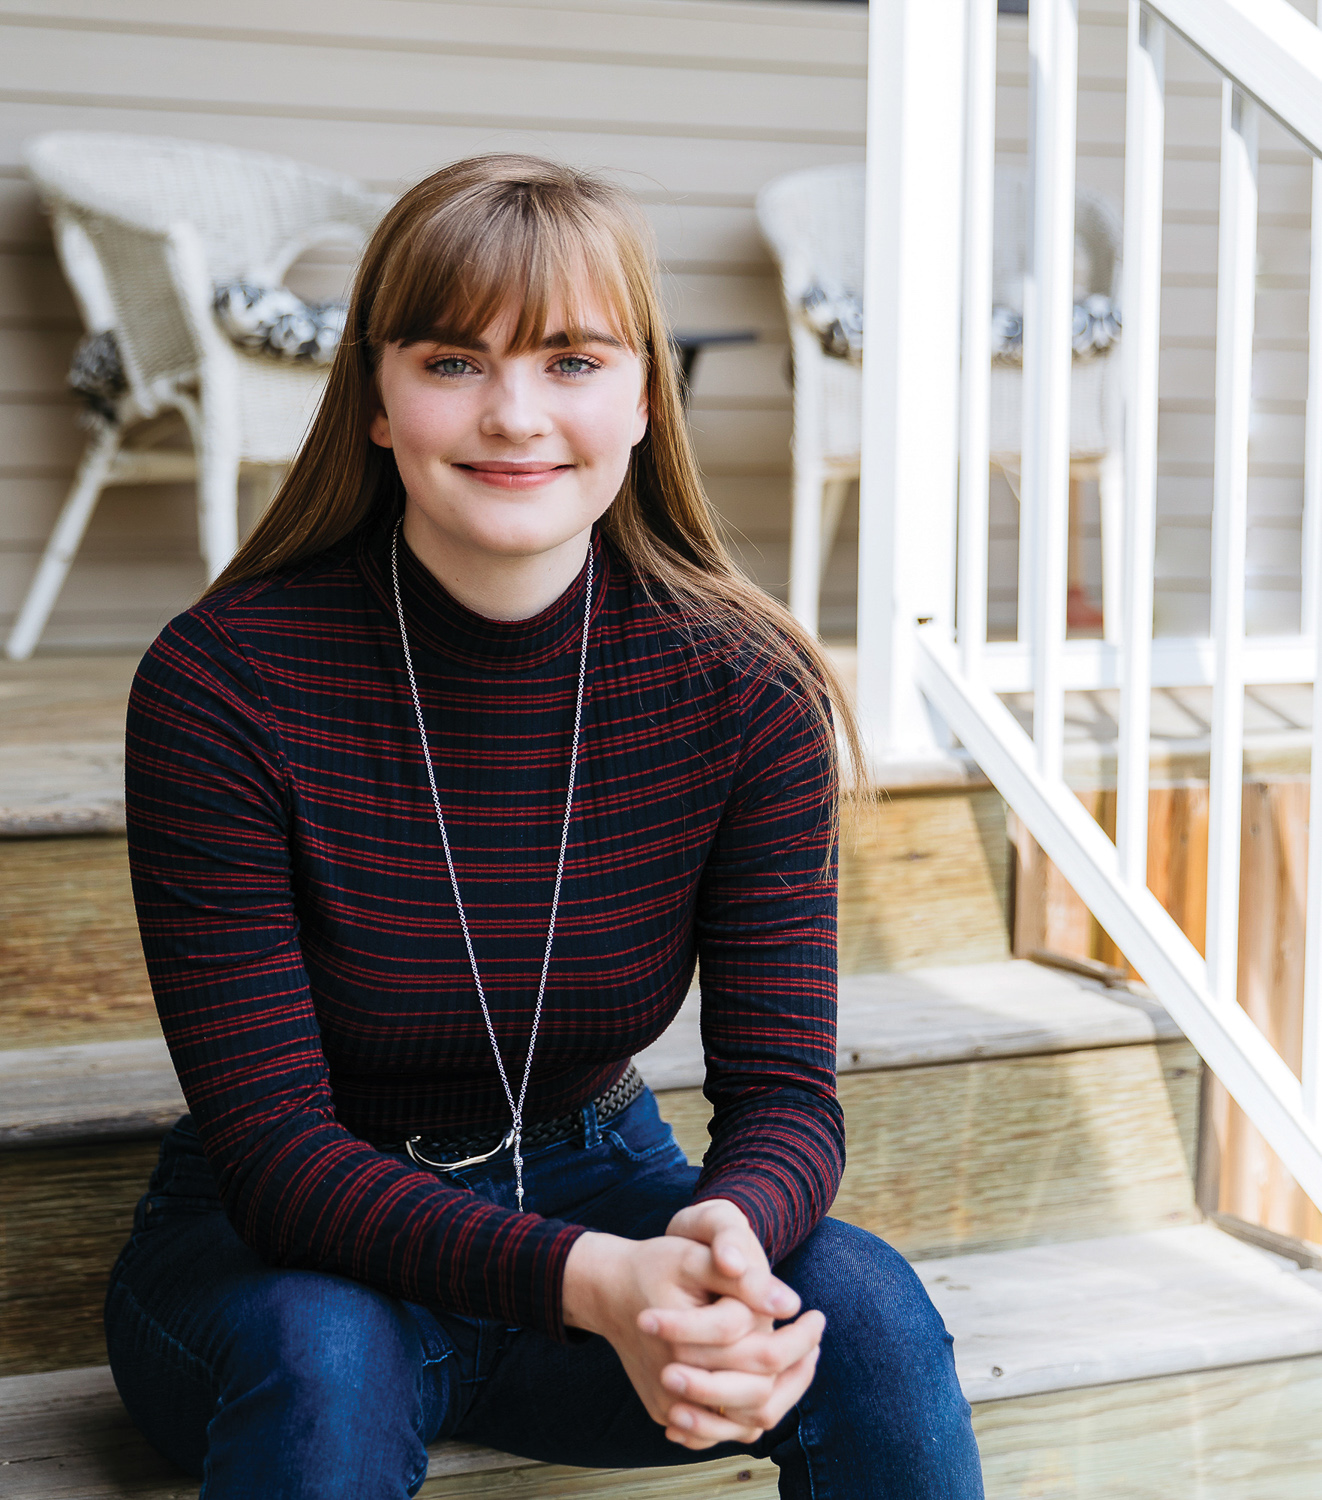 Grace Fisher, 16, underwent successful heart surgery four years ago. Improving health outcomes for children like Grace is the goal of the new Stollery Science Lab program. Photo by: Ryan Whitefield.